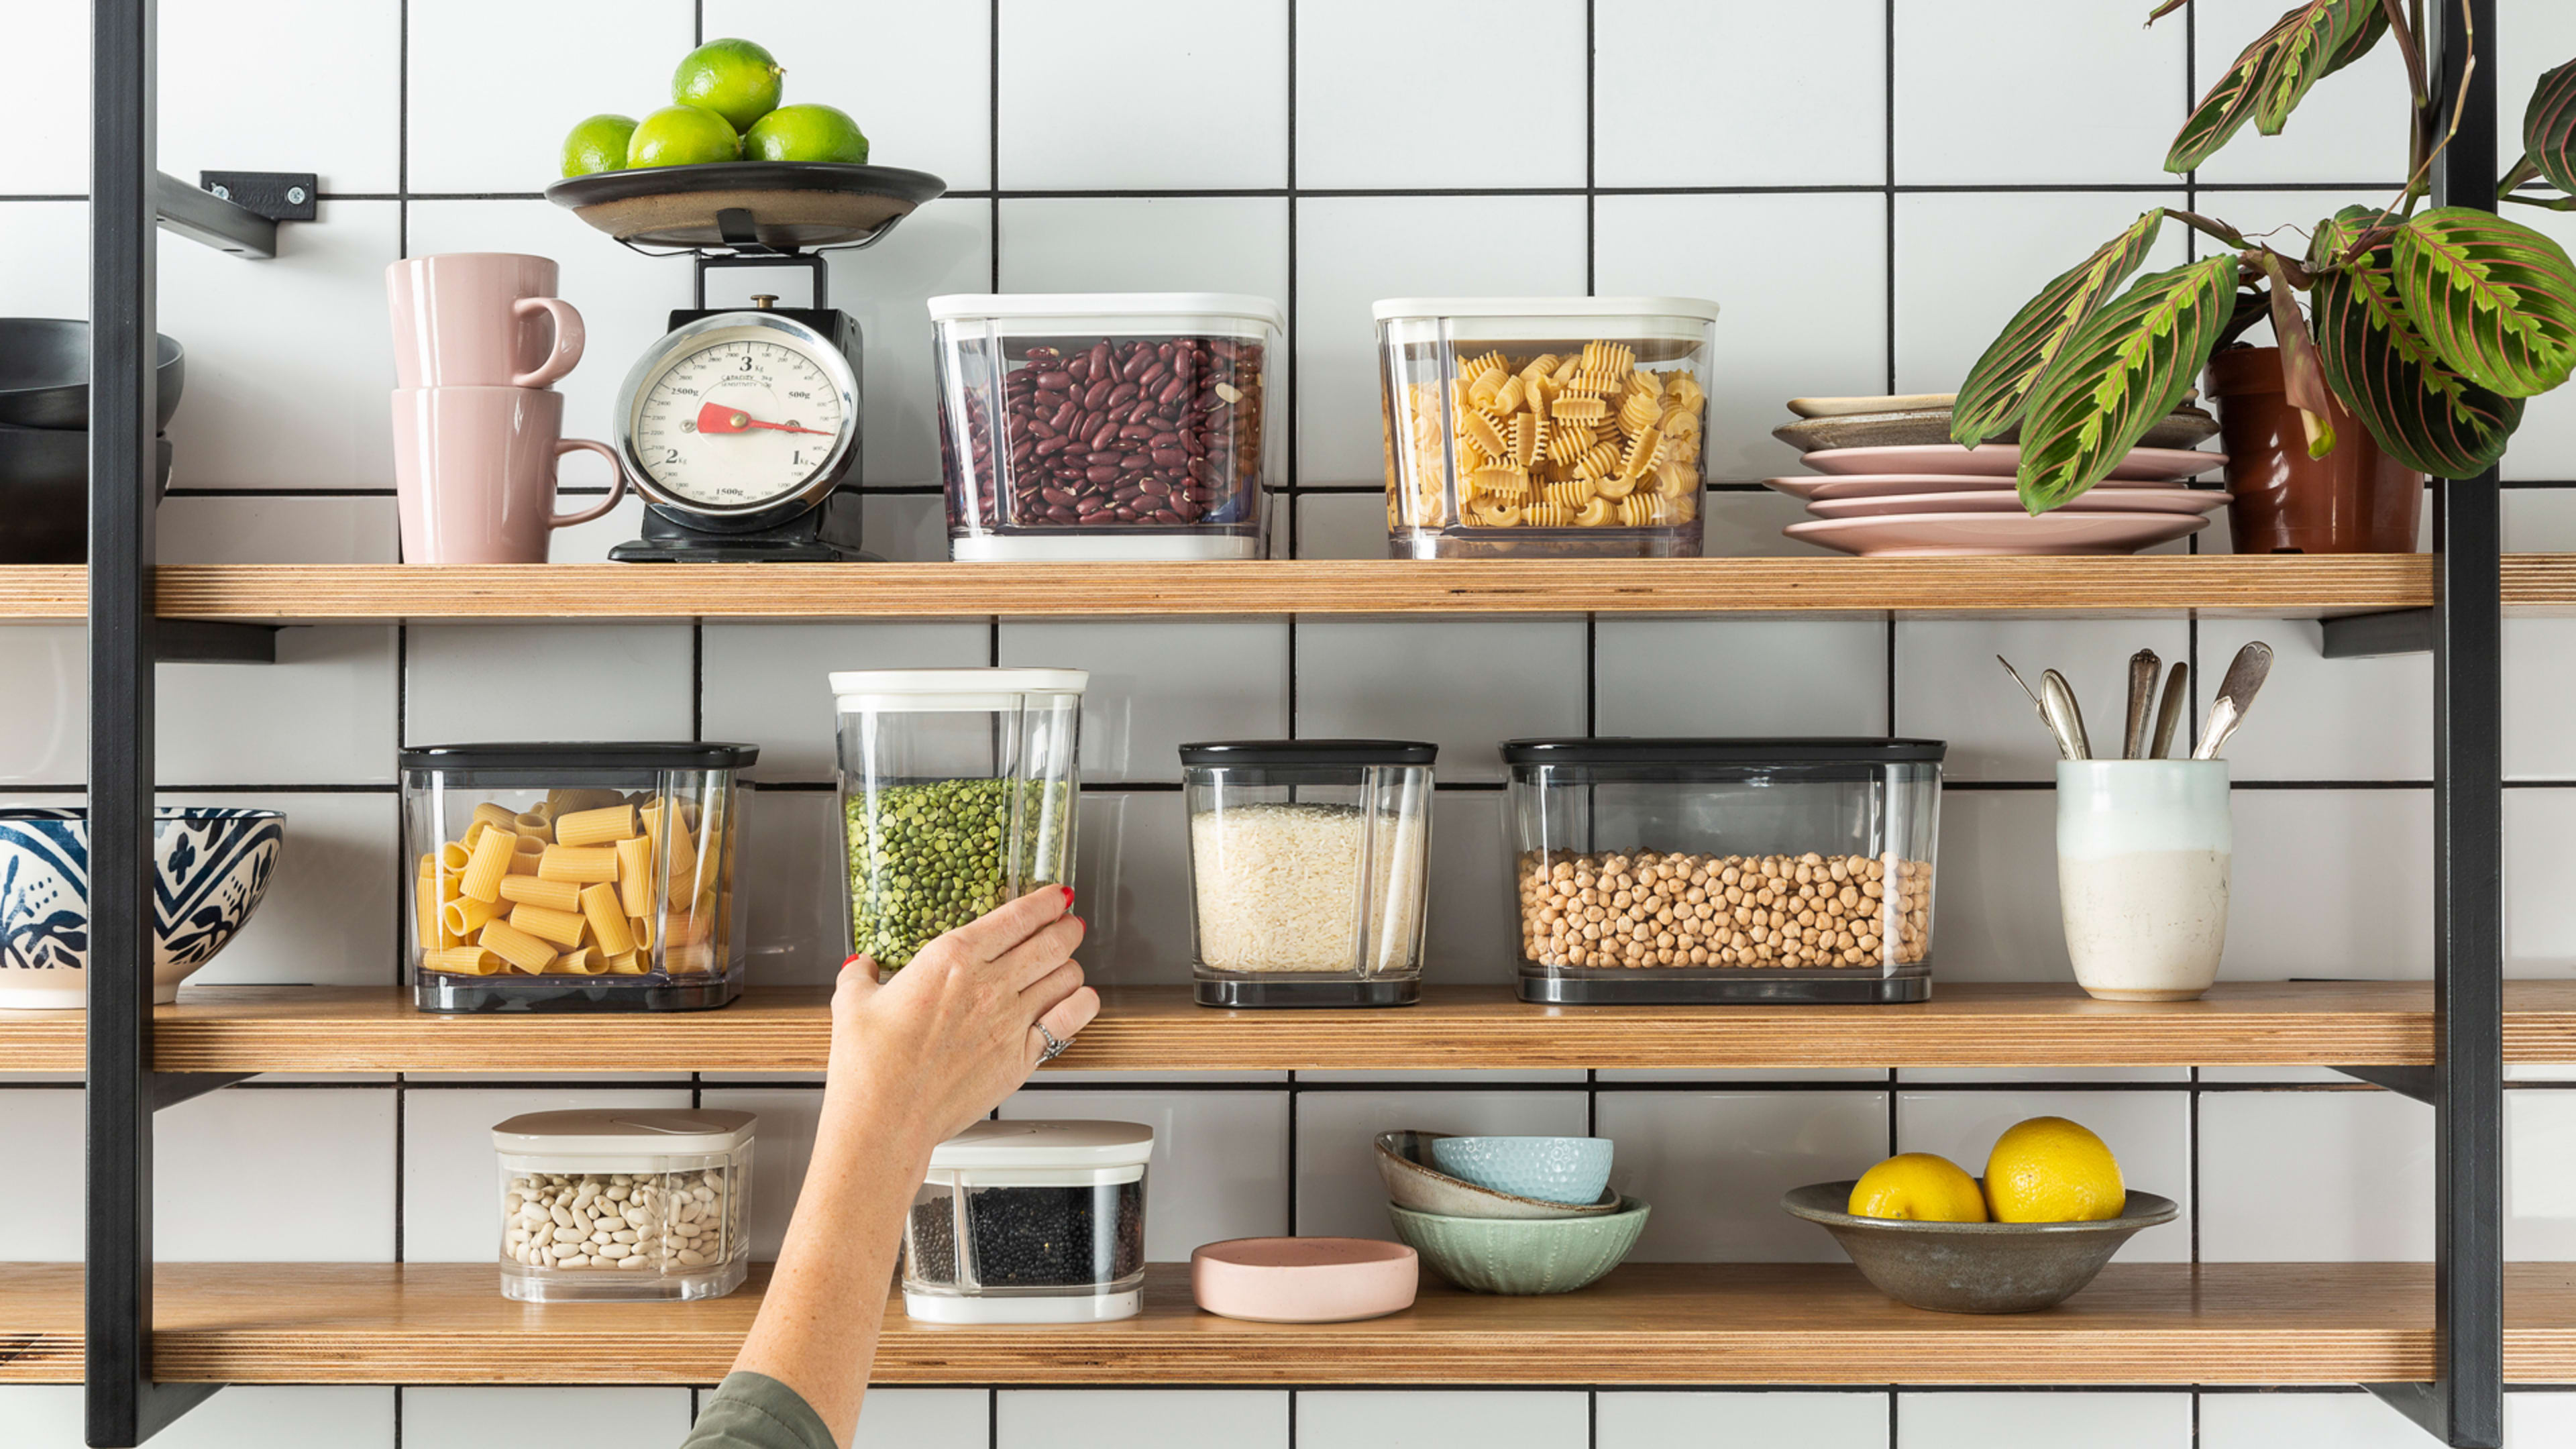 These high-tech storage containers will tell you when food goes bad